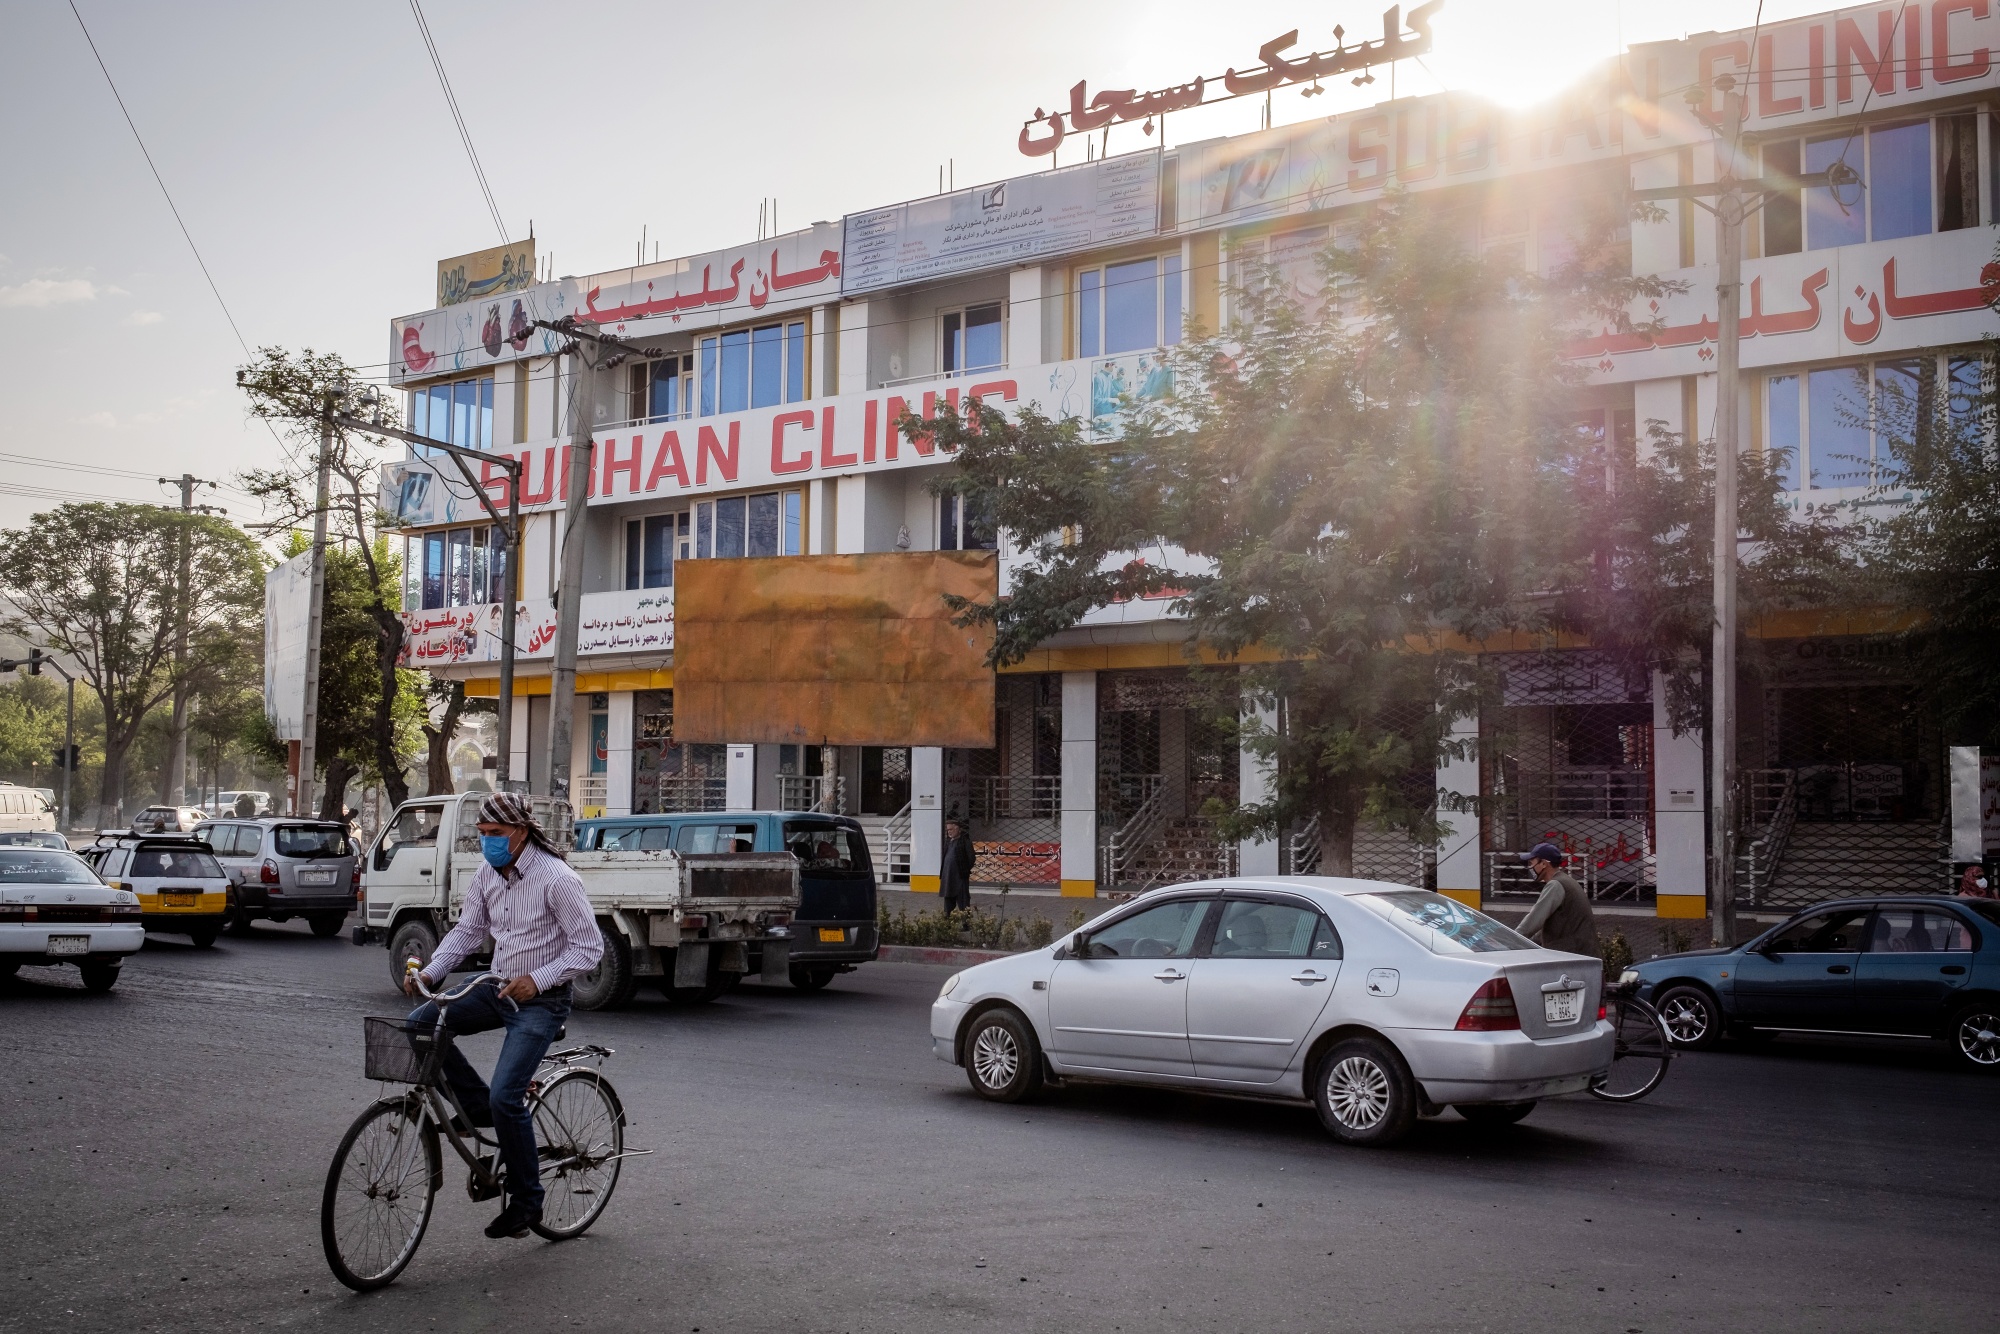 A cyclist rides&nbsp;past the Subhan Clinic in Kabul, which the Afghan&nbsp;health ministry shut&nbsp;for selling its own anti-coronavirus medicine without a valid license